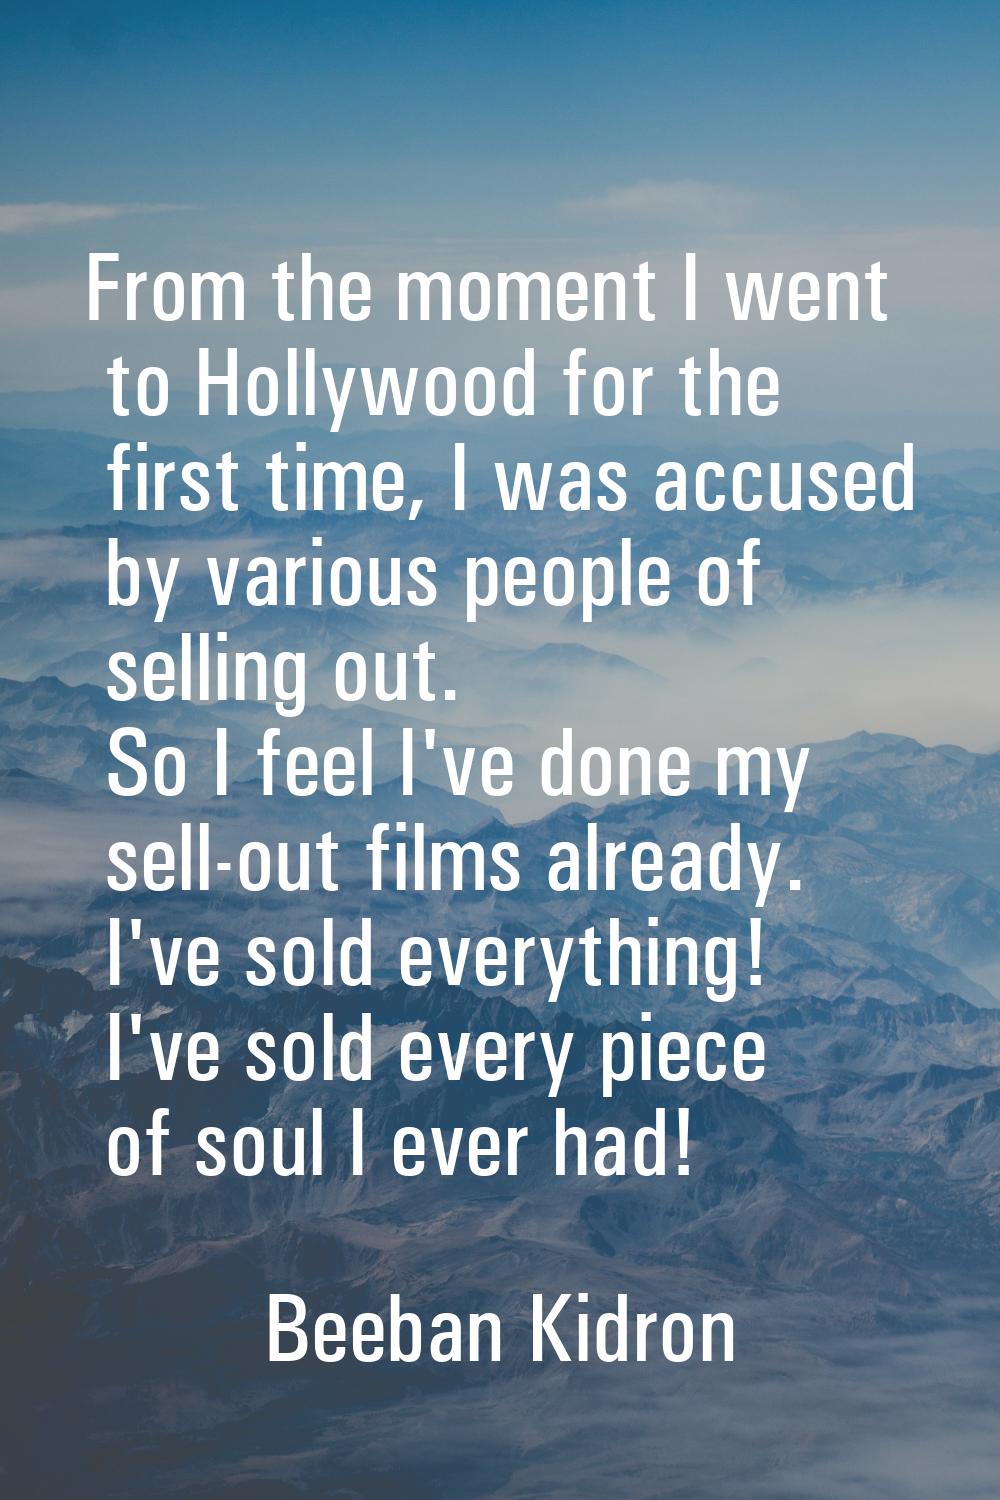 From the moment I went to Hollywood for the first time, I was accused by various people of selling 